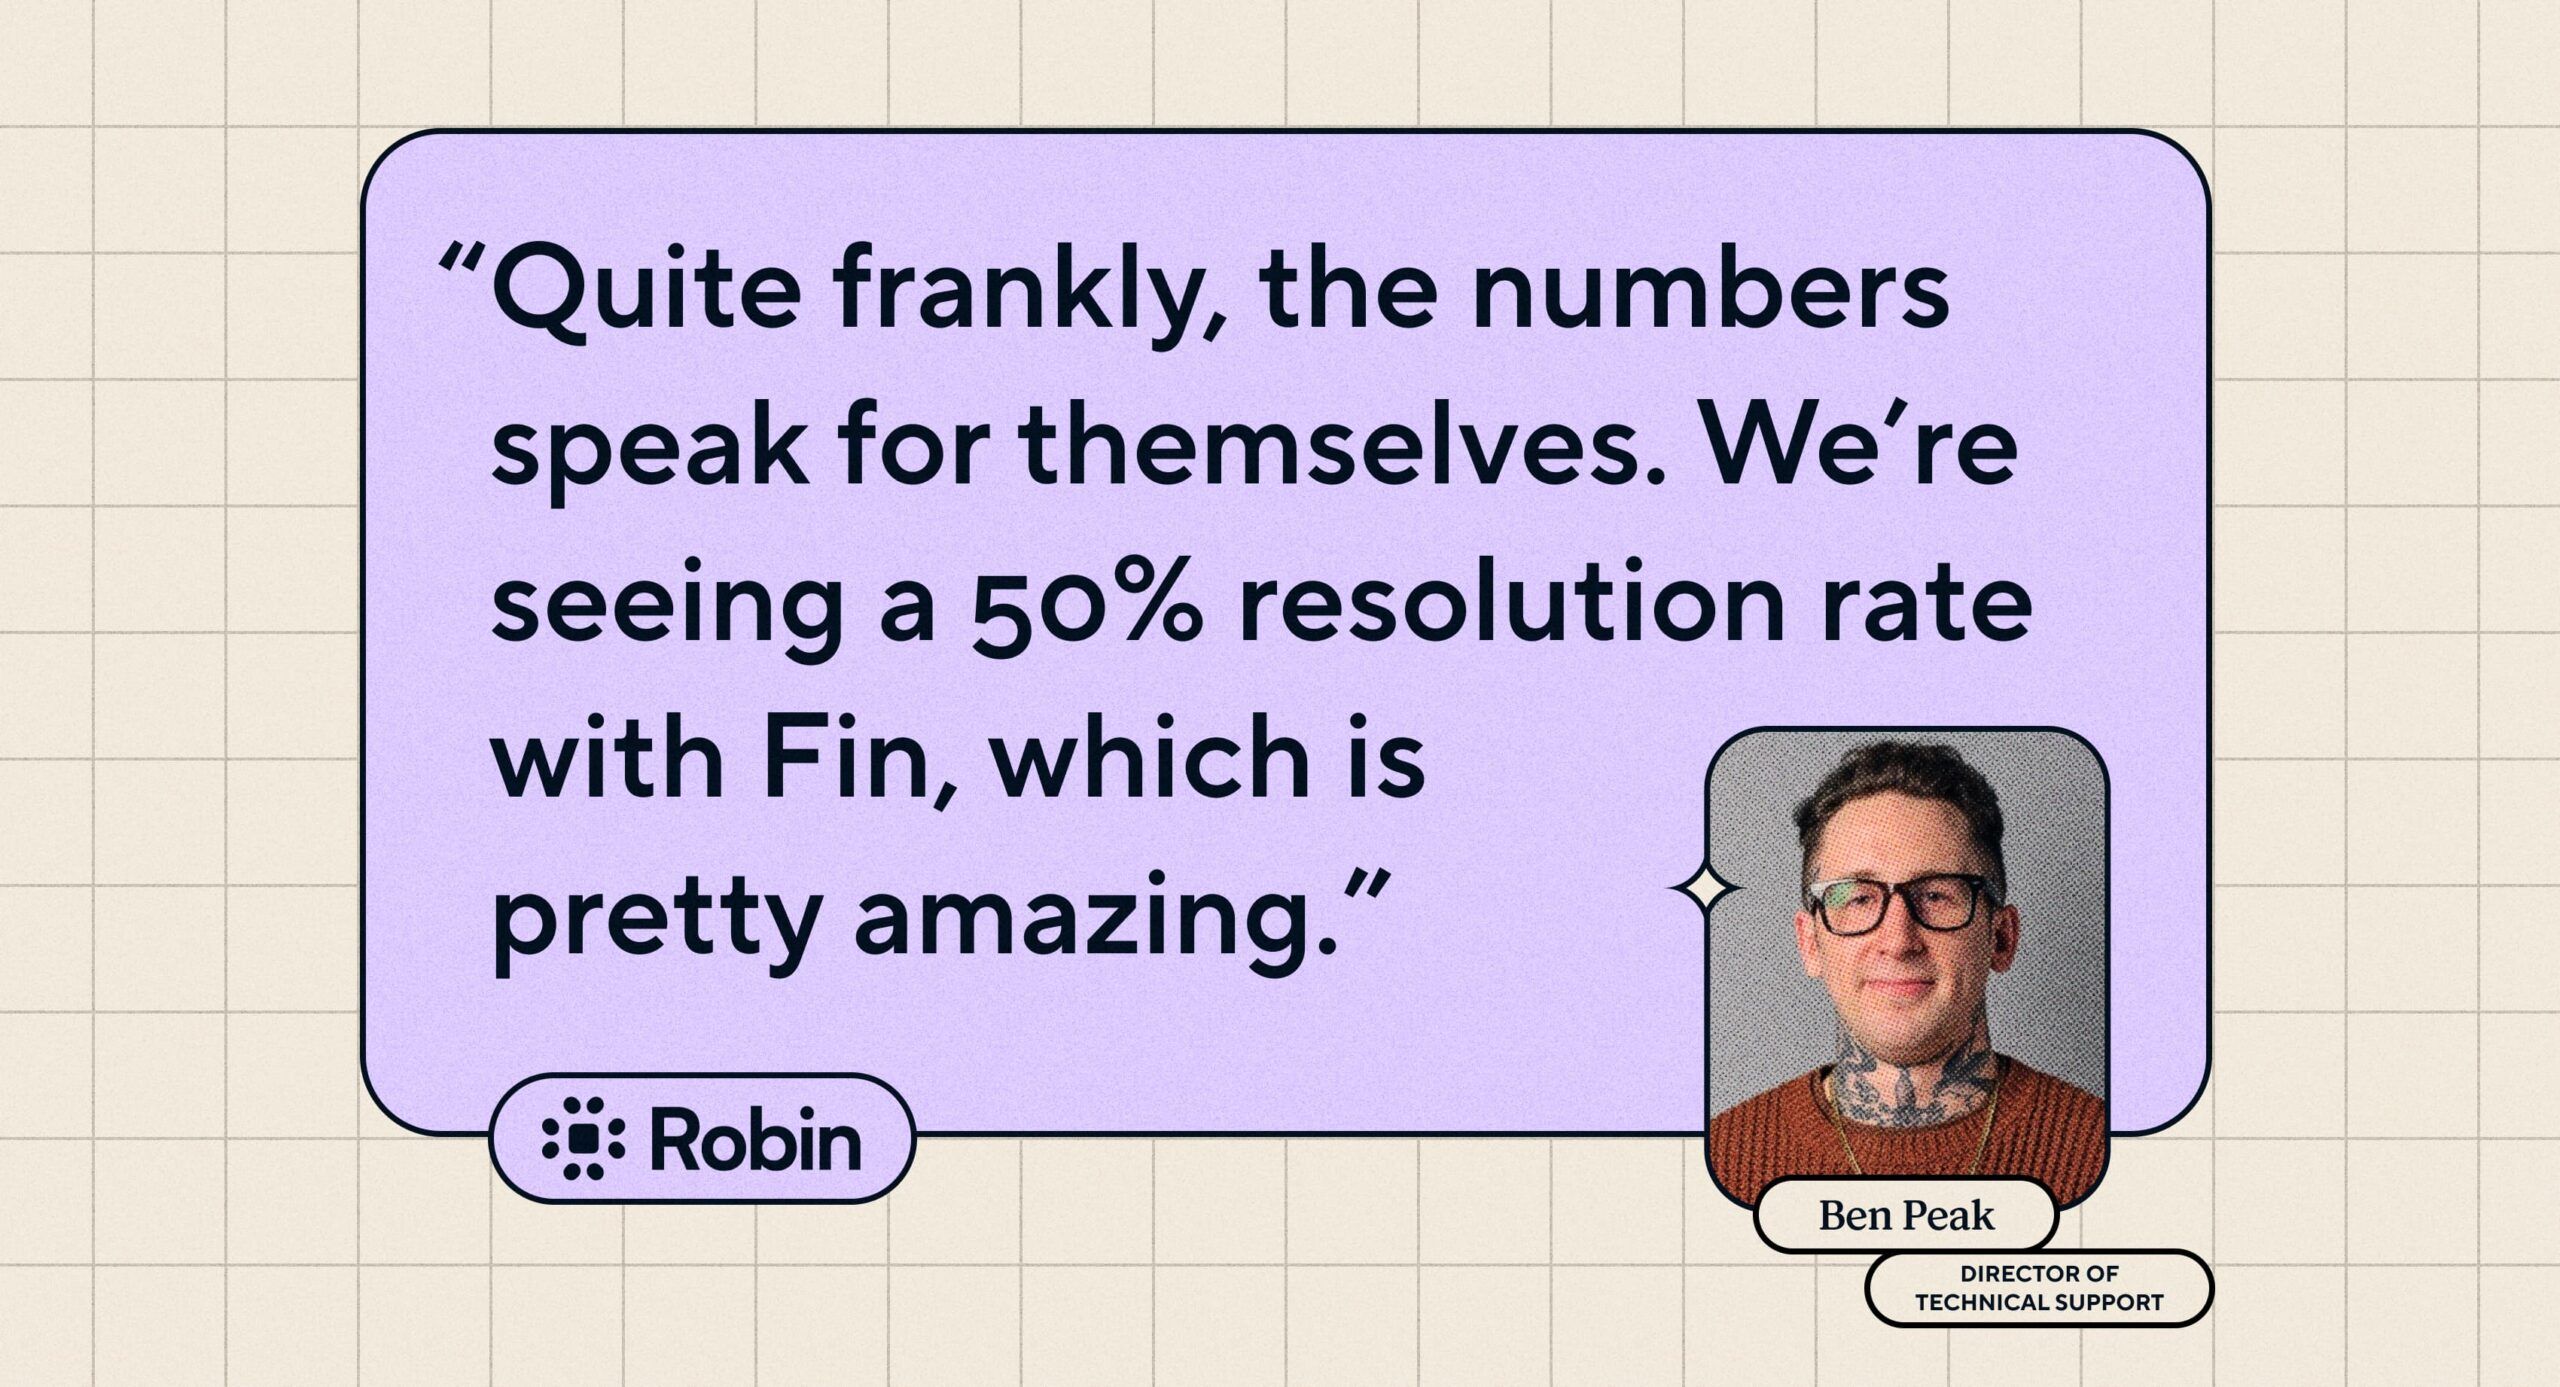 Quote: "Quite frankly, the numbers speak for themselves. We're seeing a 50% resolution rate with Fin, which is pretty amazing." Ben Peak, Director of Technical Support at Robin.